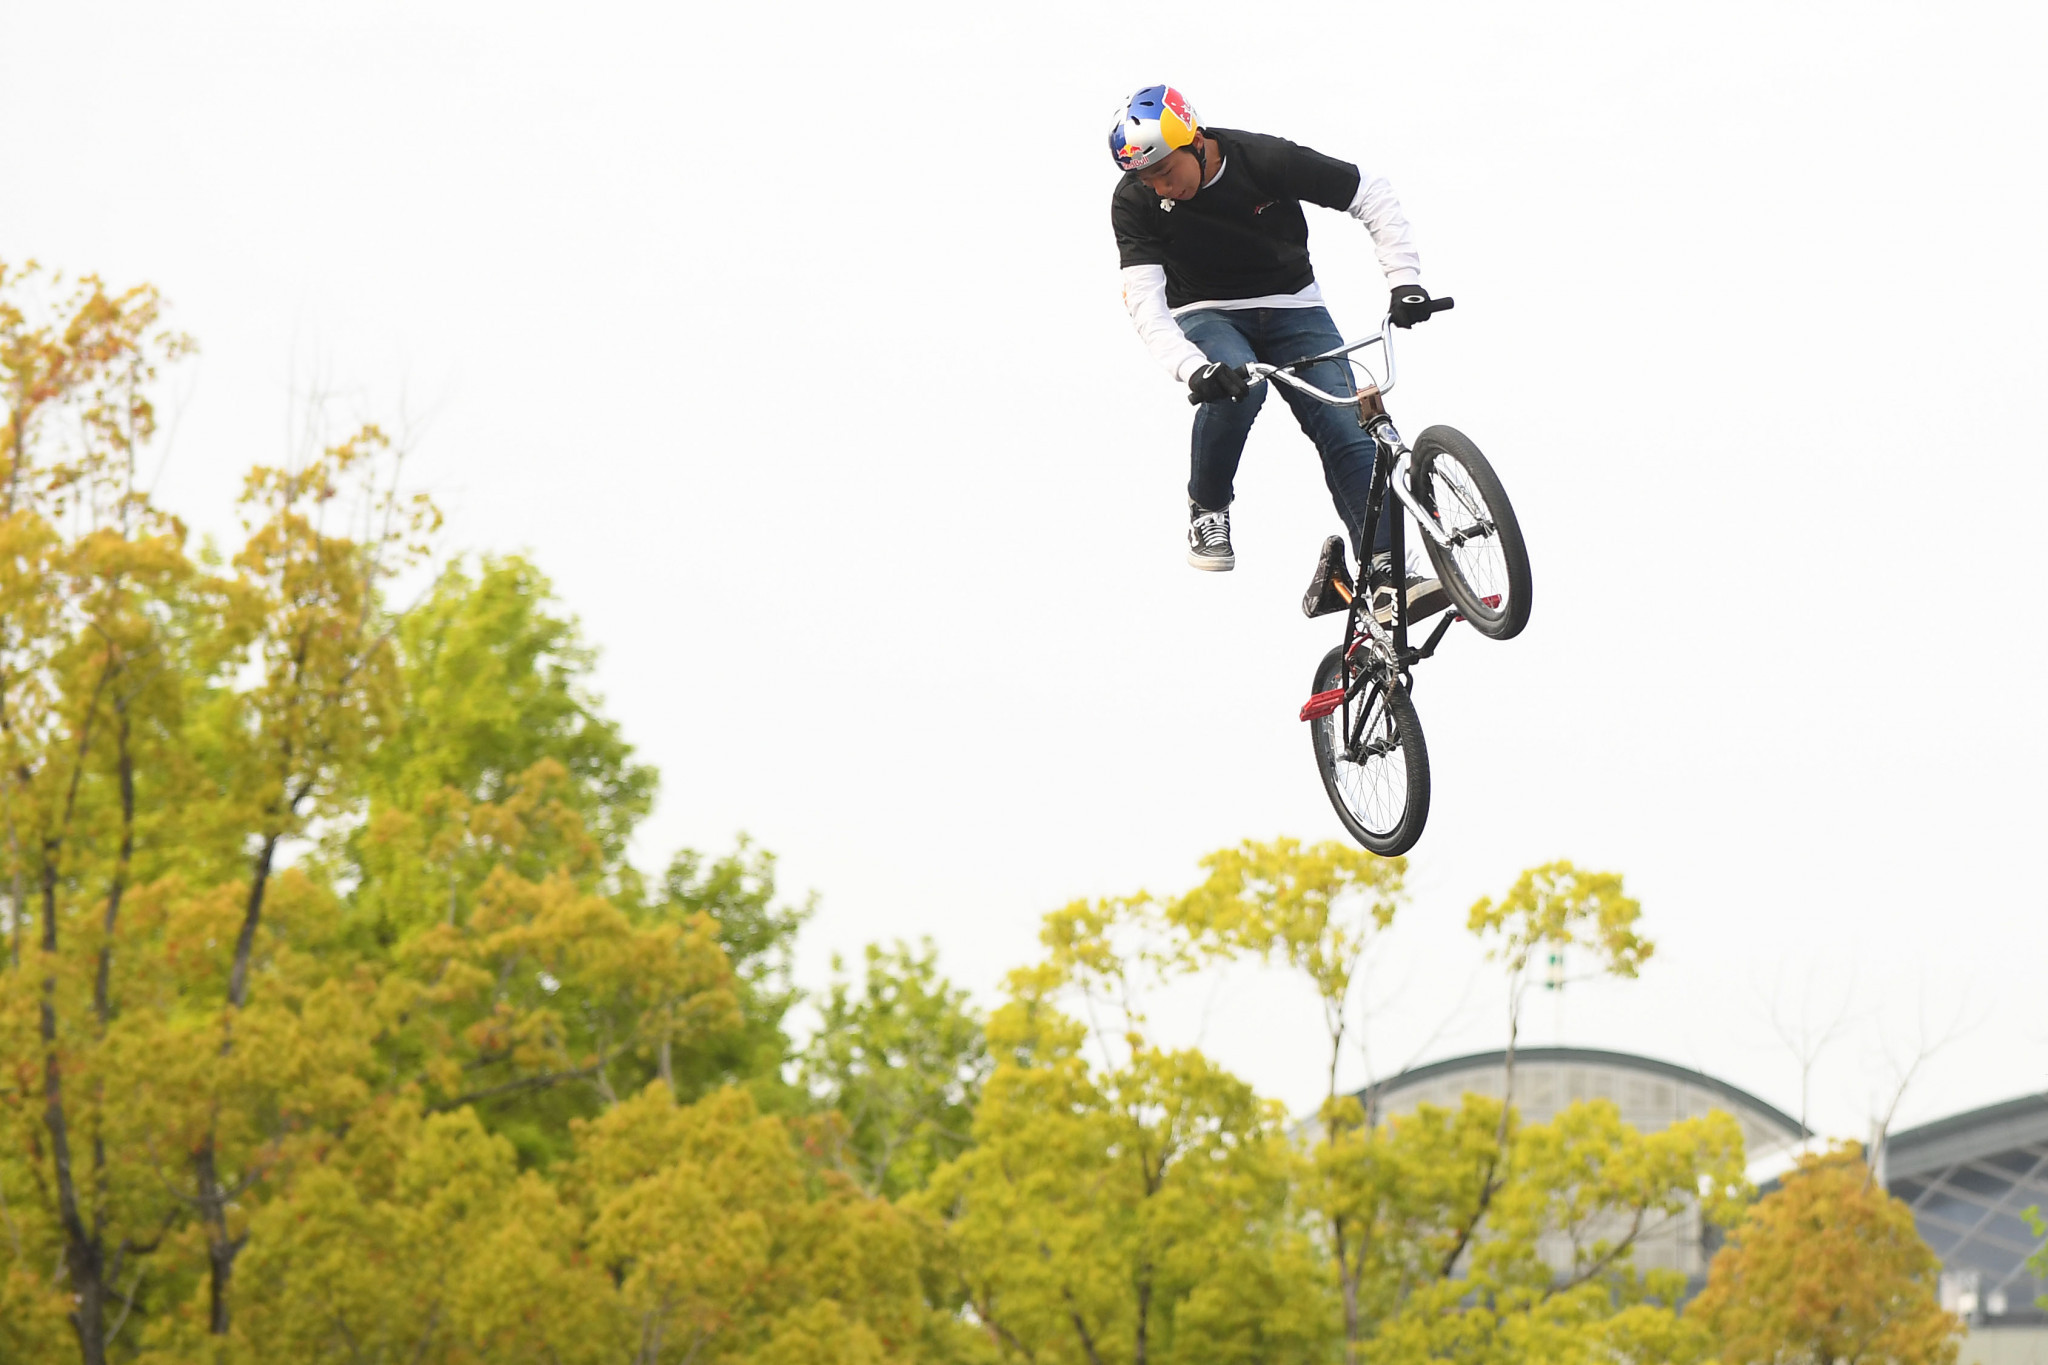 Japanese BMX freestyle hope Nakamura recovering from broken heel prior to Tokyo 2020